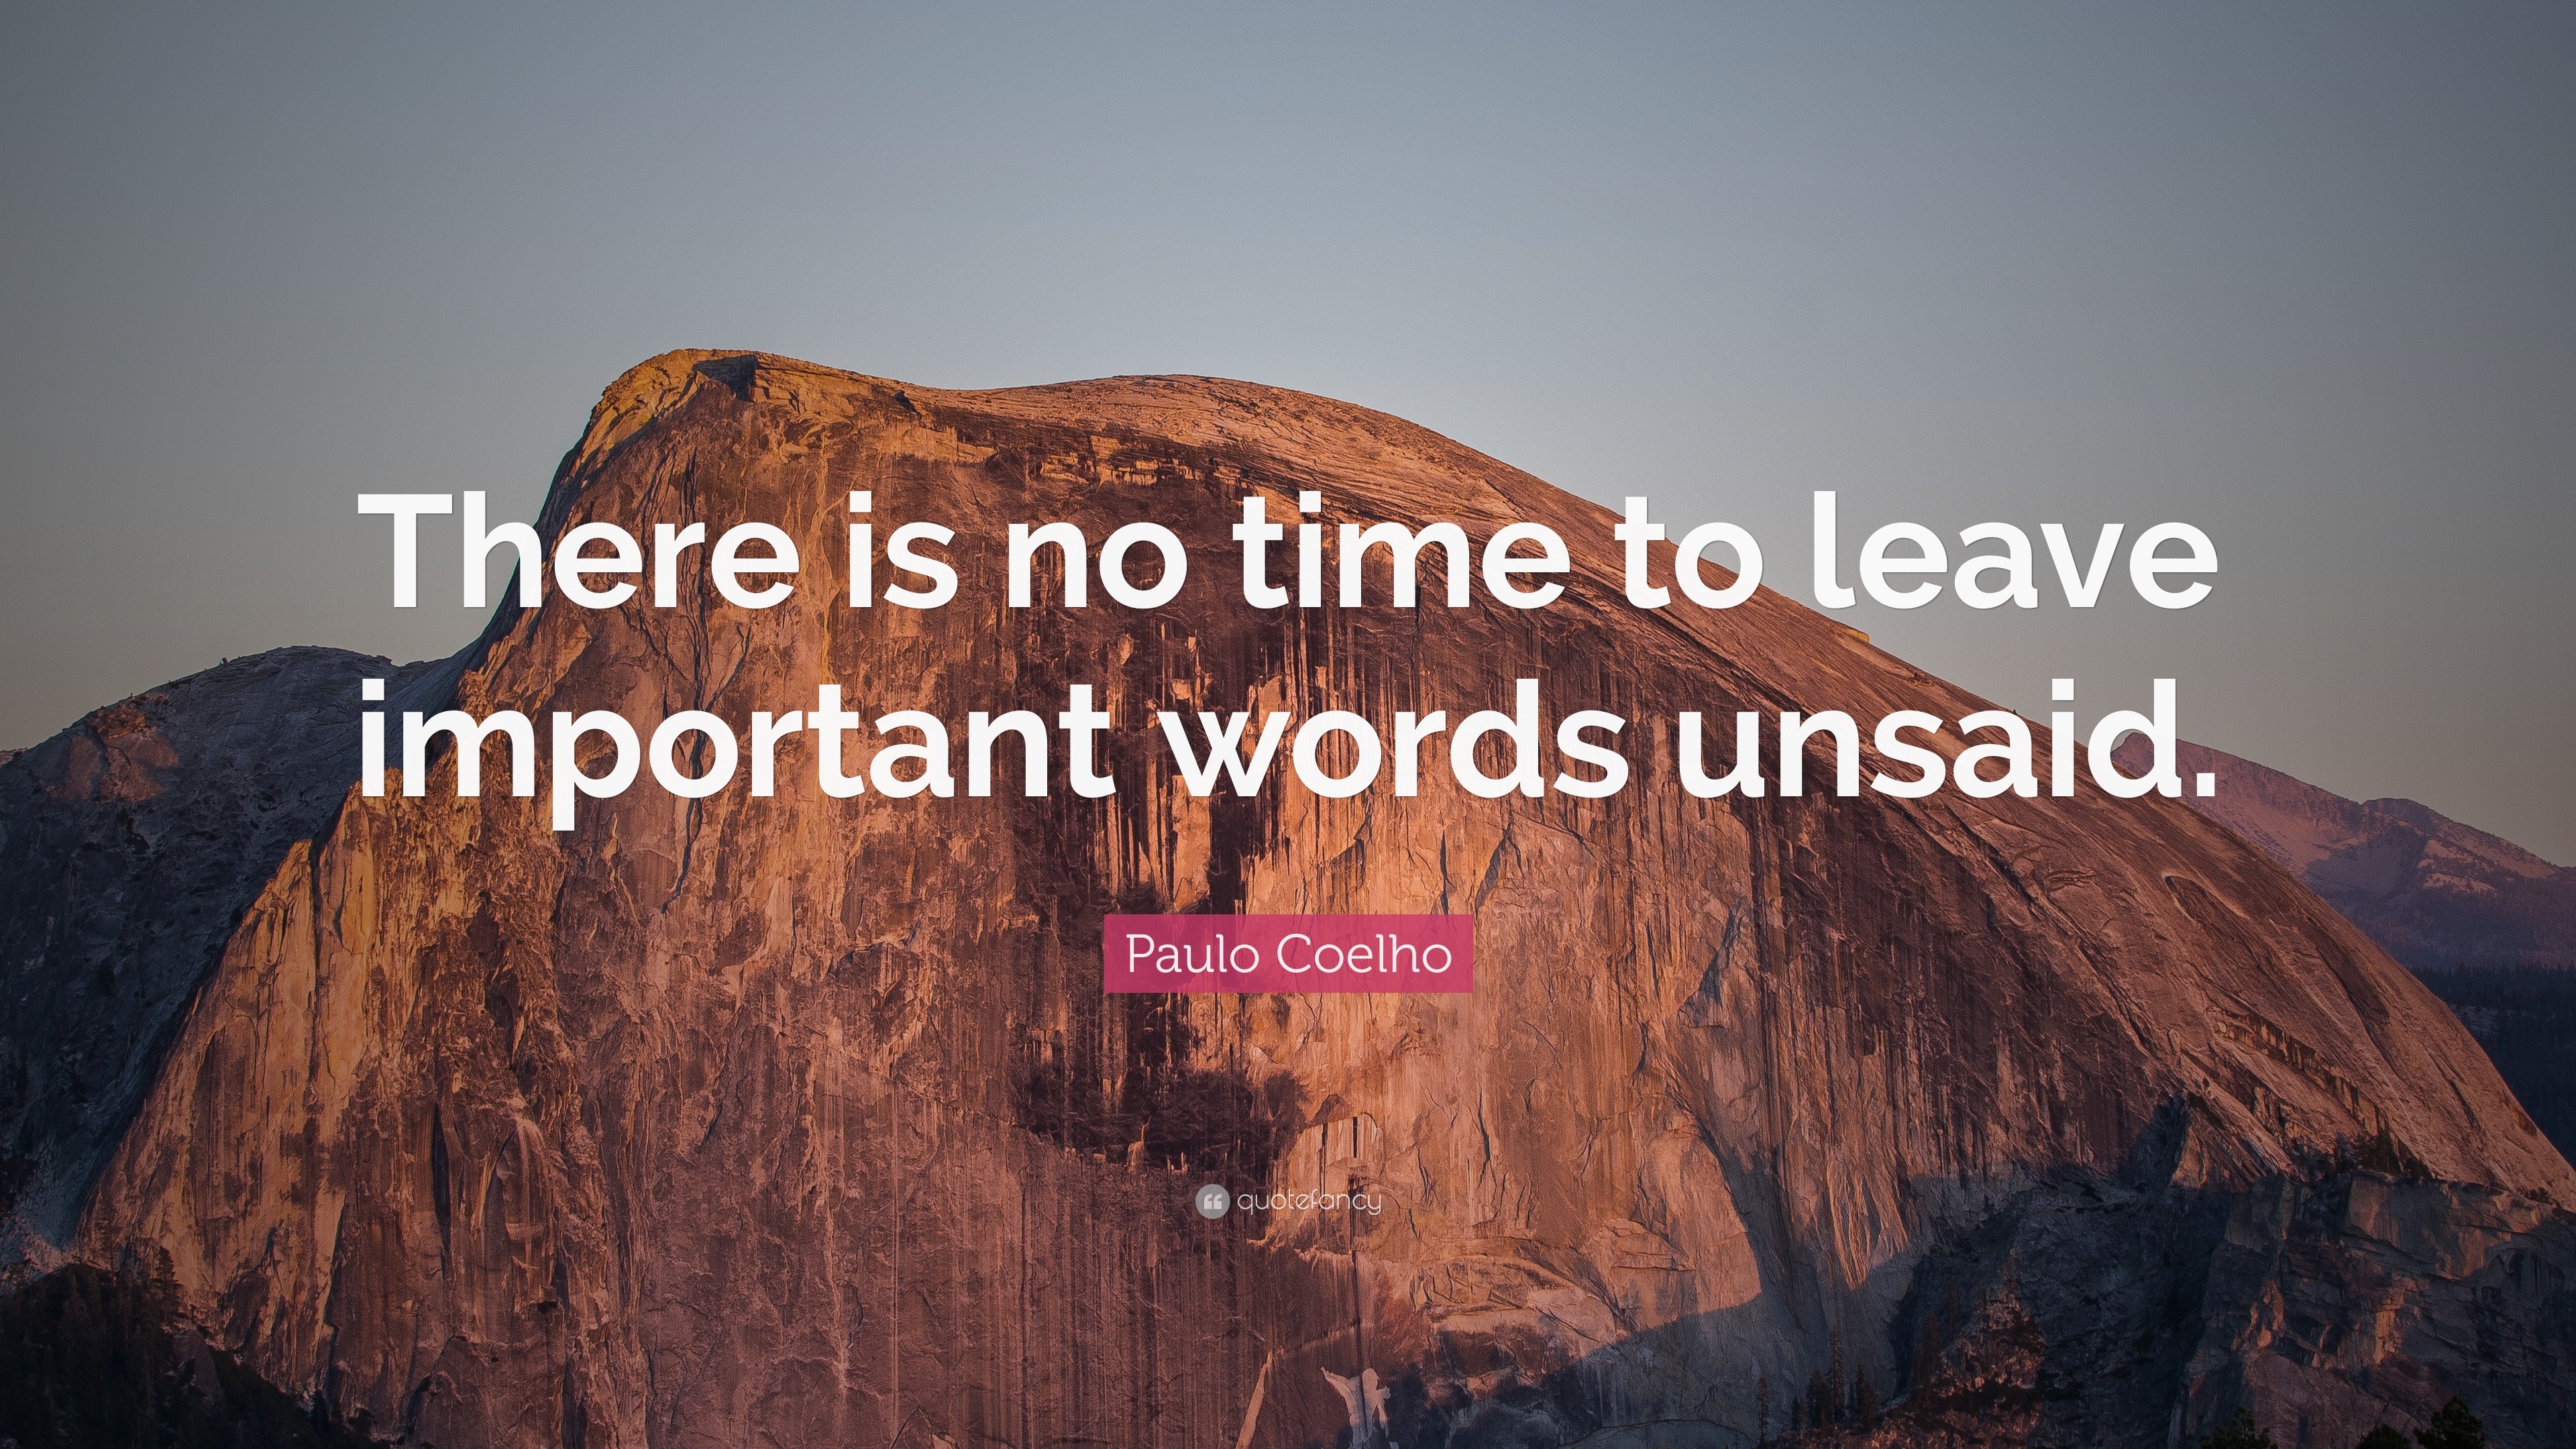 Paulo Coelho Quote: "There is no time to leave important words unsaid." (16 wallpapers) - Quotefancy